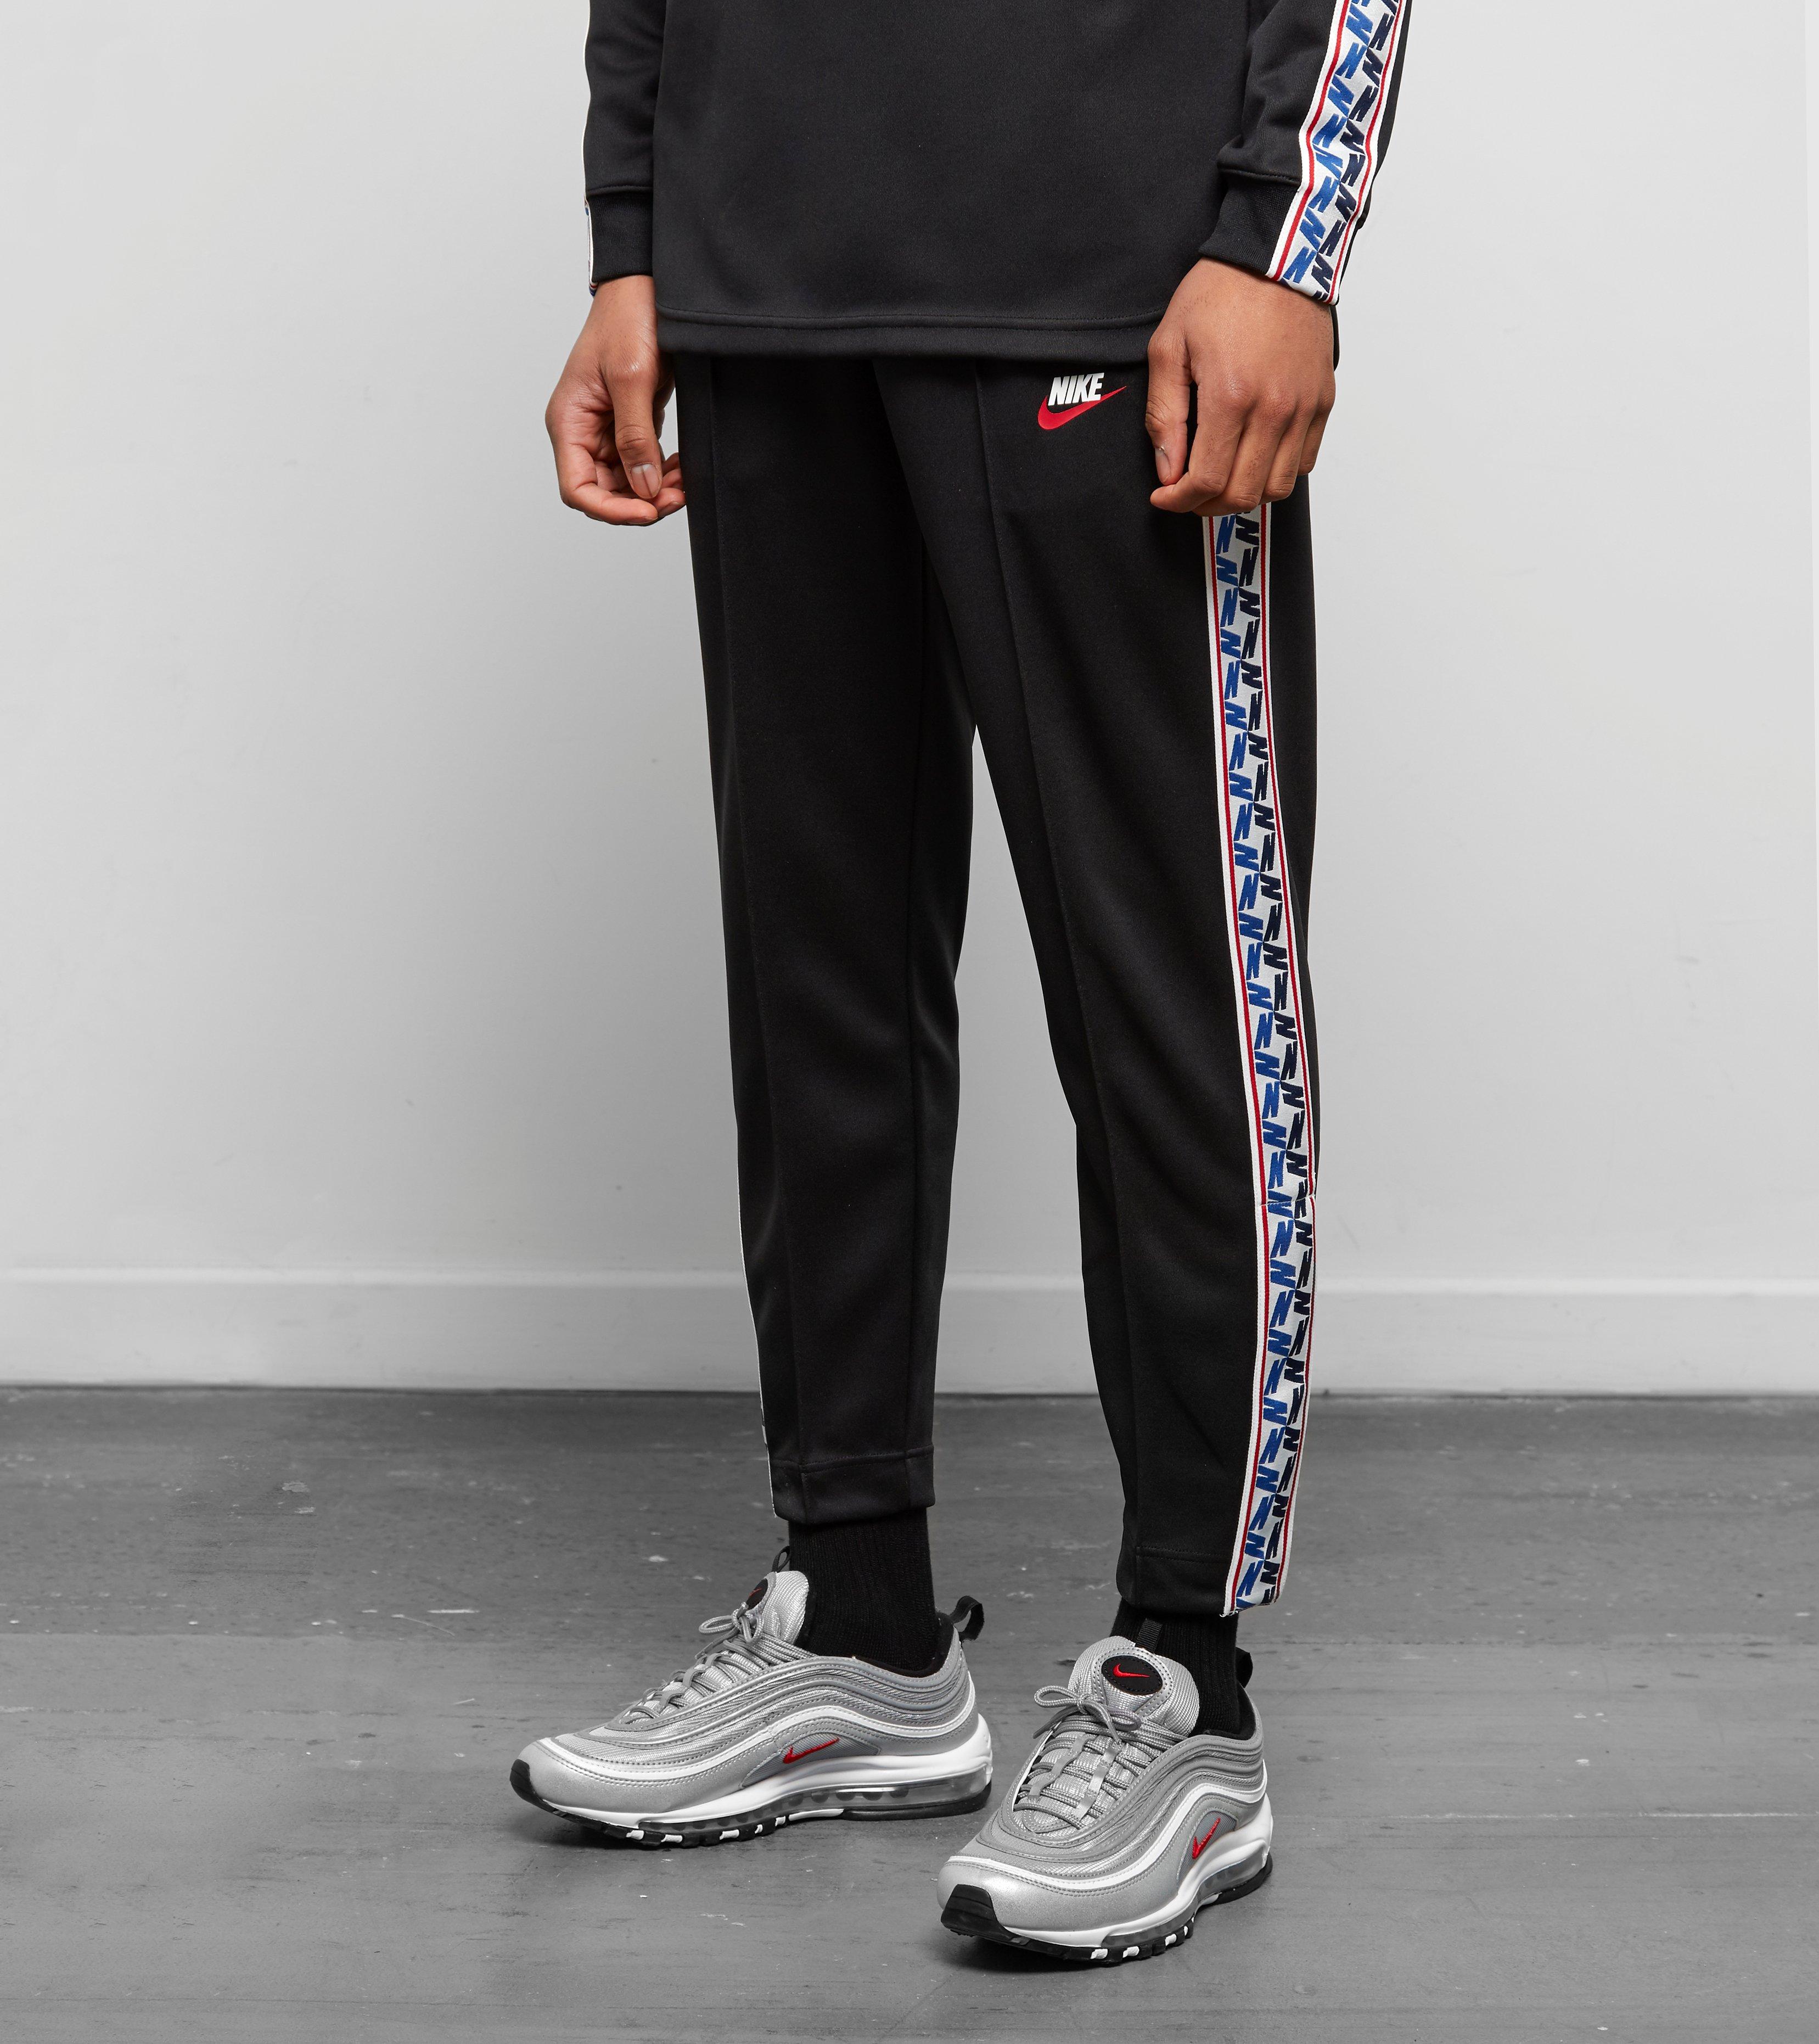 Nike Taped Pant Poly Hot Sale, SAVE - aktual.co.id